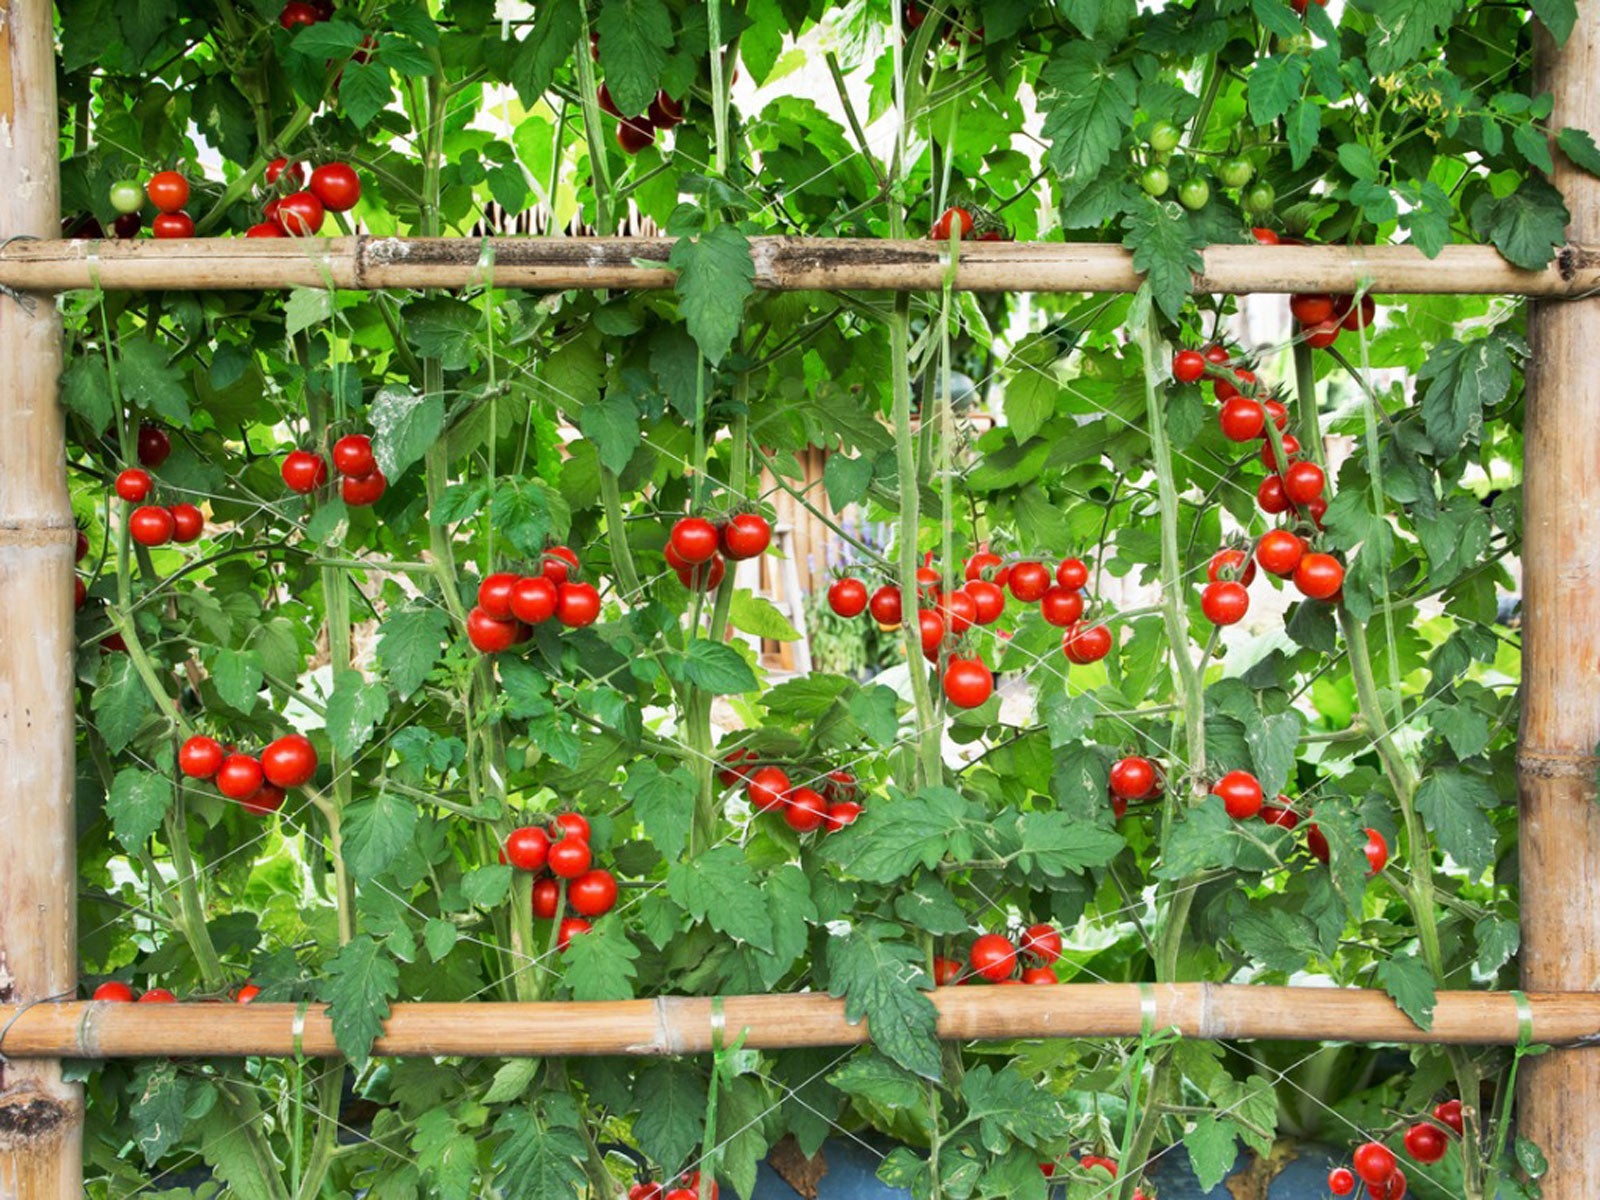 Growing Tomatoes On An Arch – How To Build A Tomato Archway